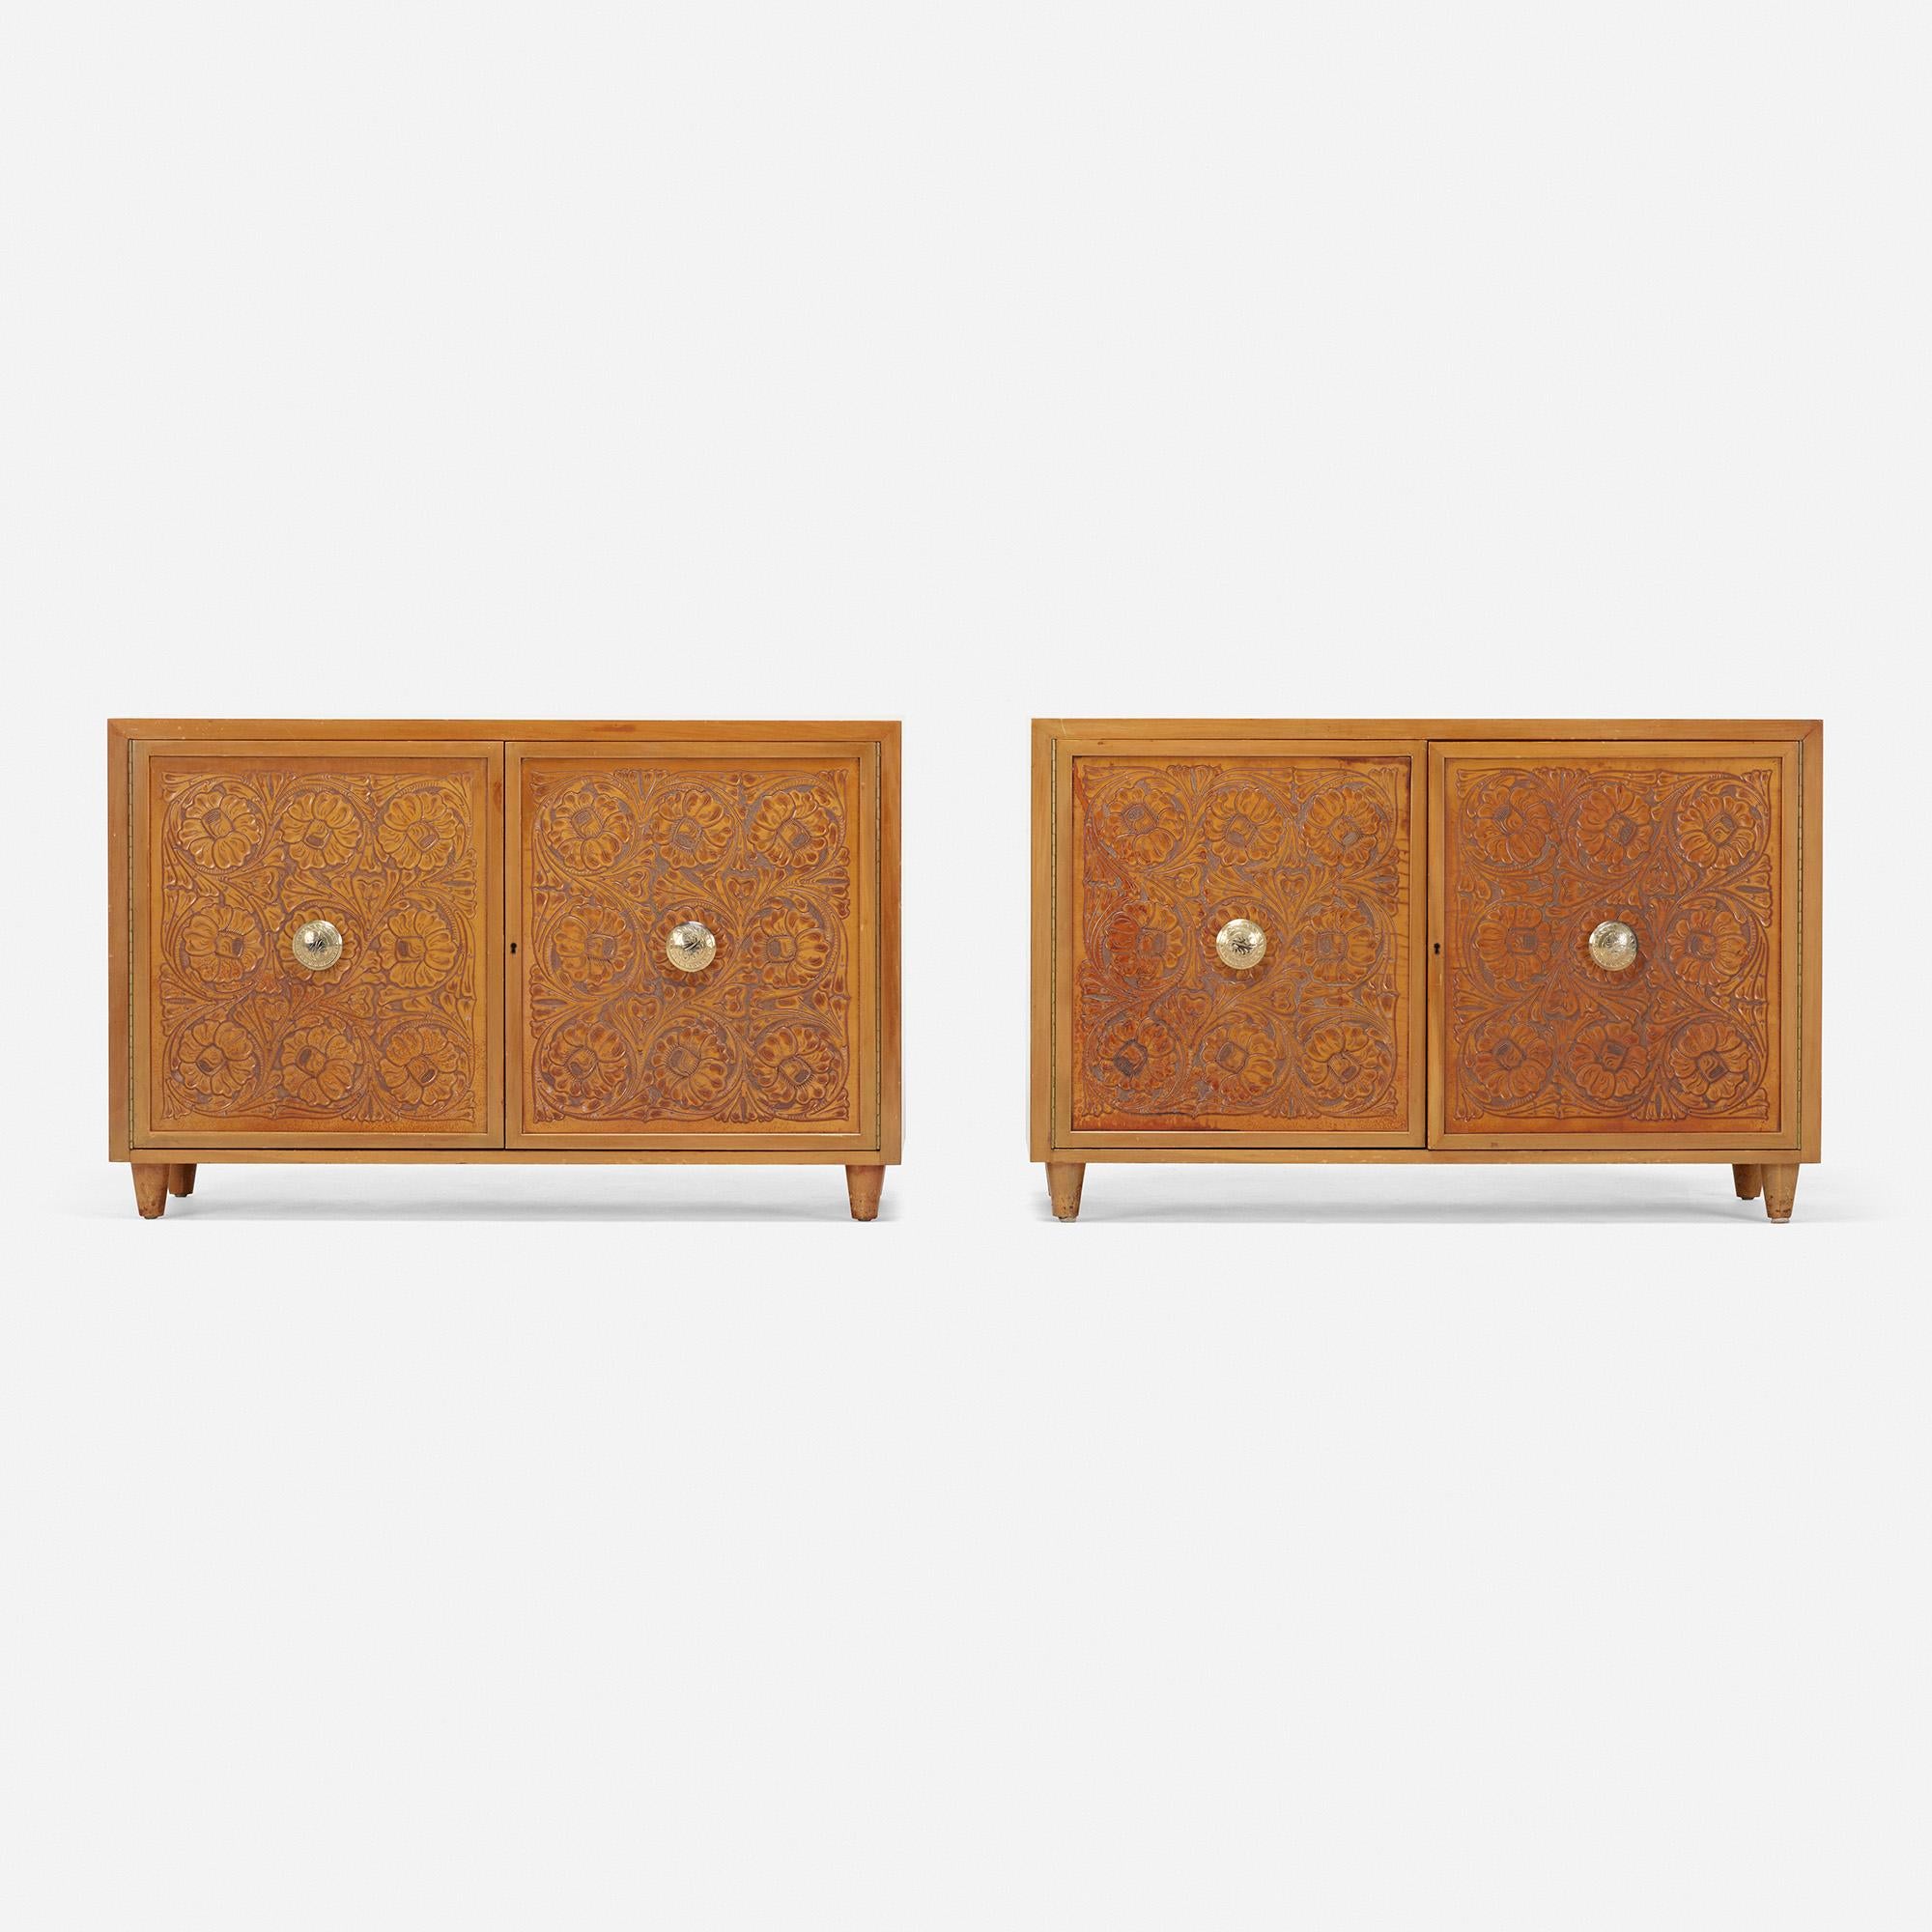 Plated Pair of Tooled Leather Cabinets